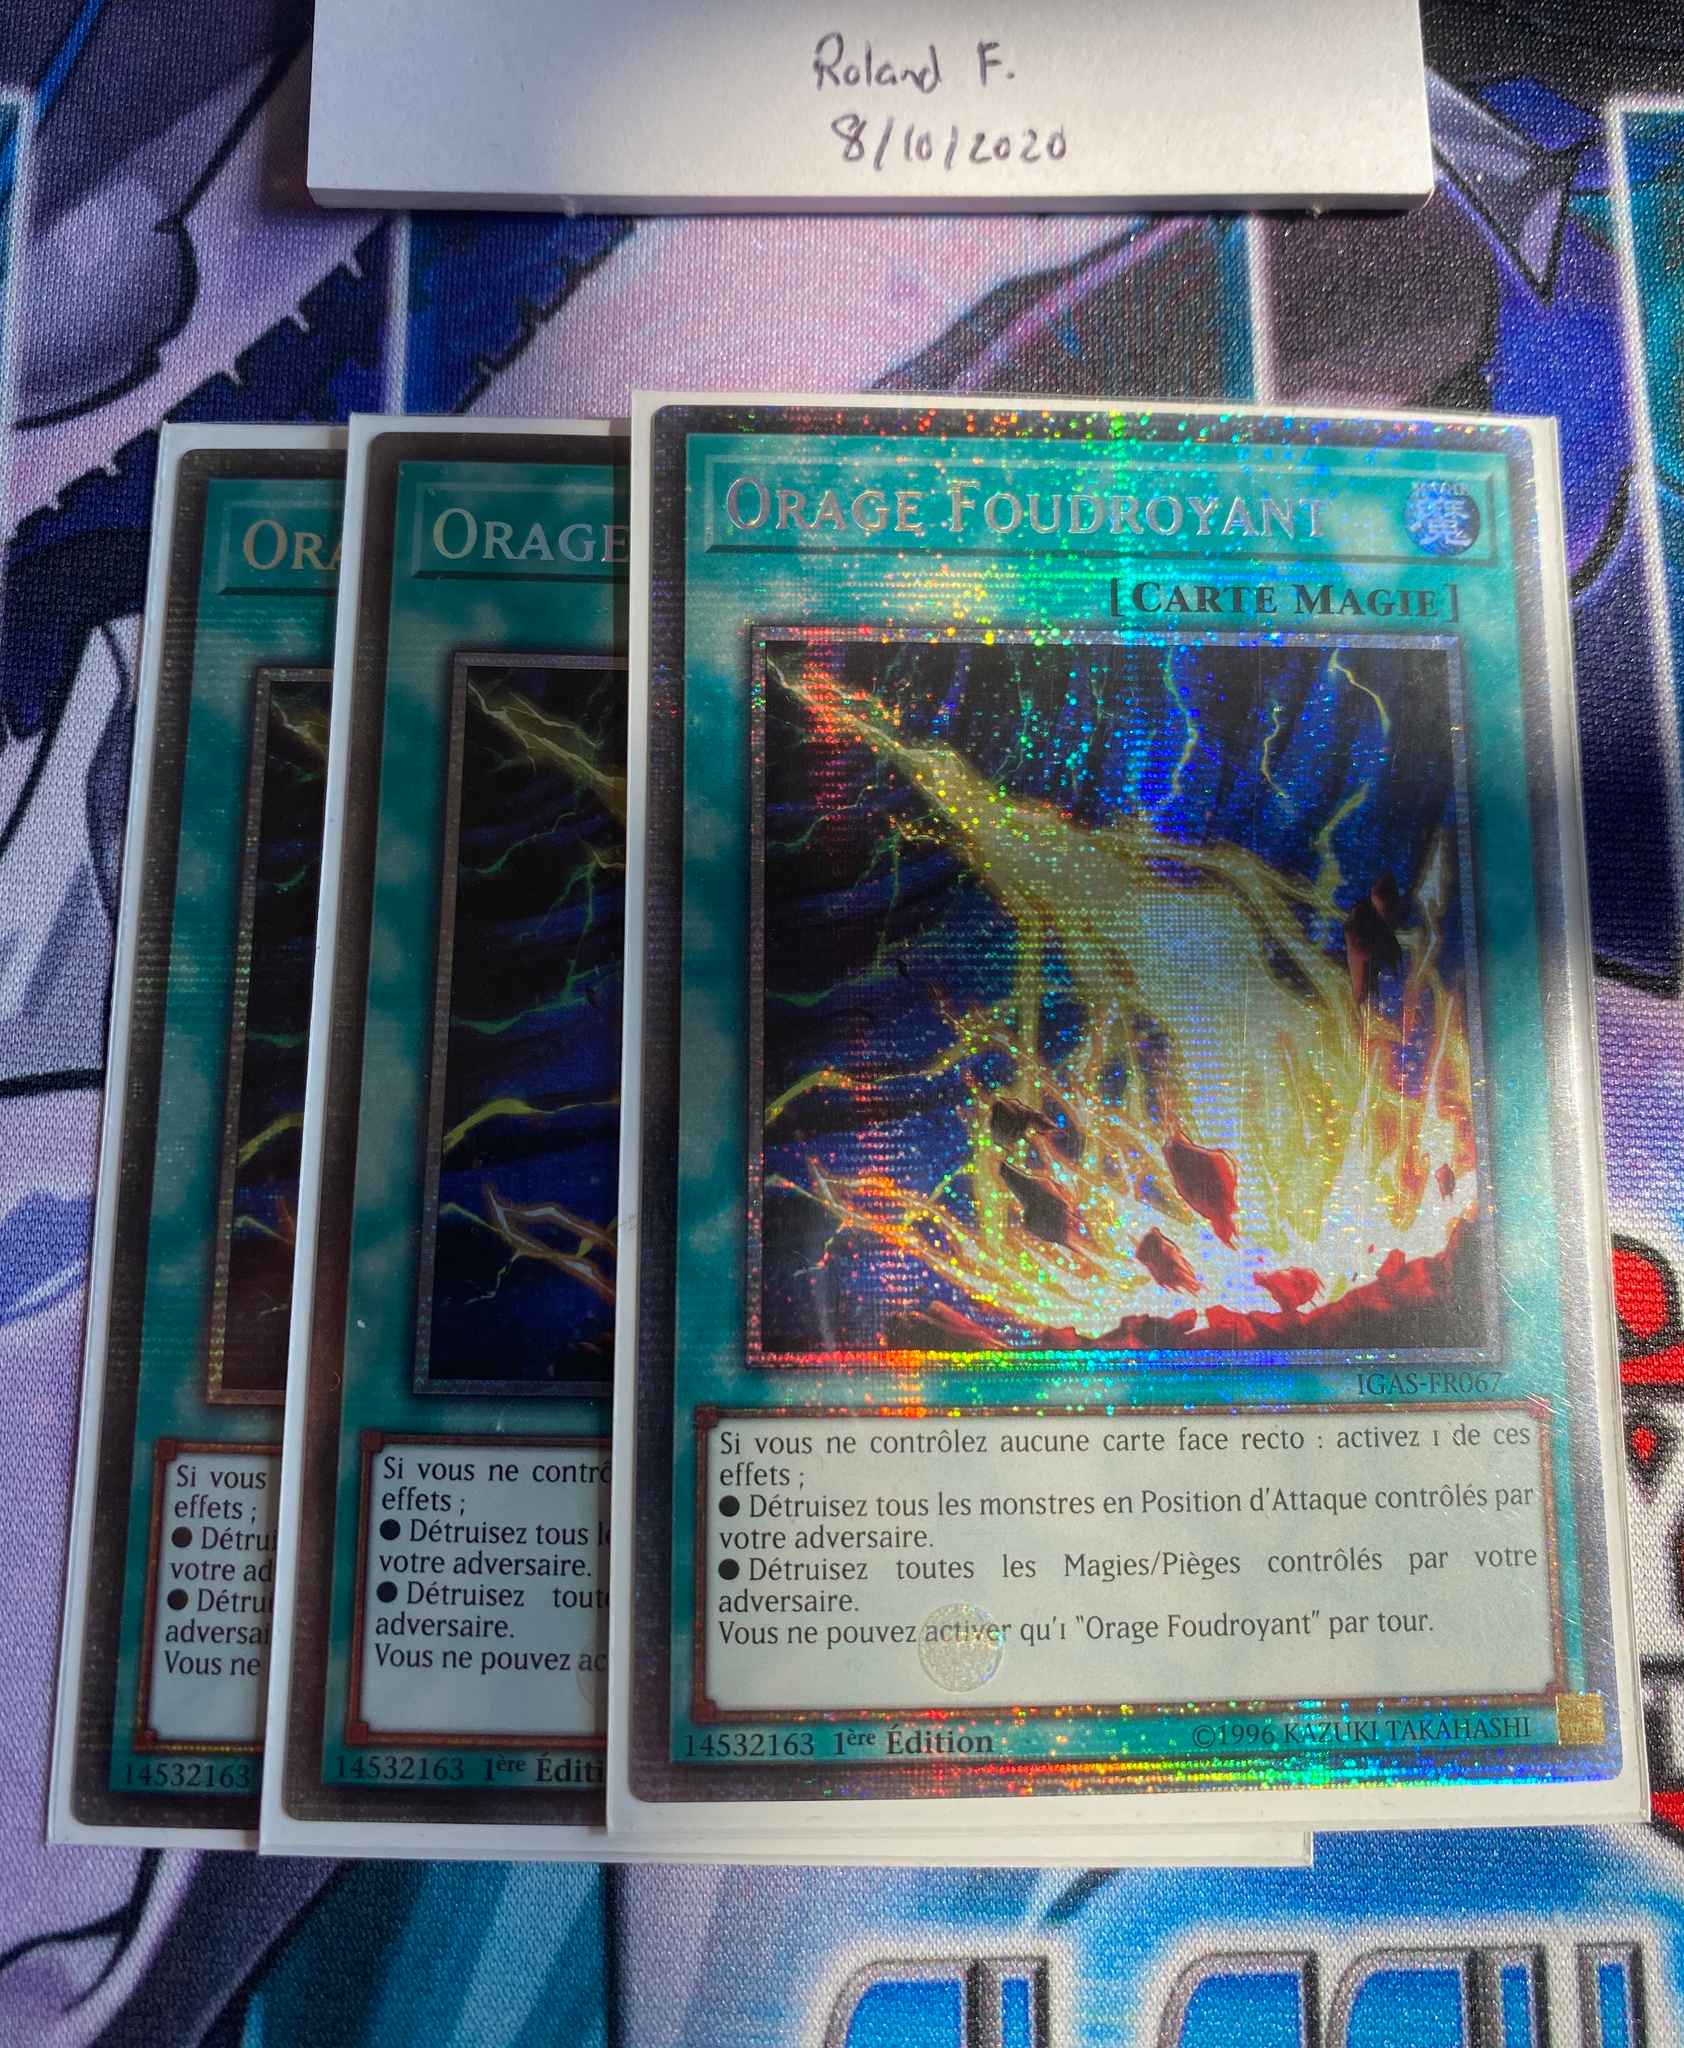 Yu-gi-oh super rare weather strikes exfo-fr063 mint new edition 1